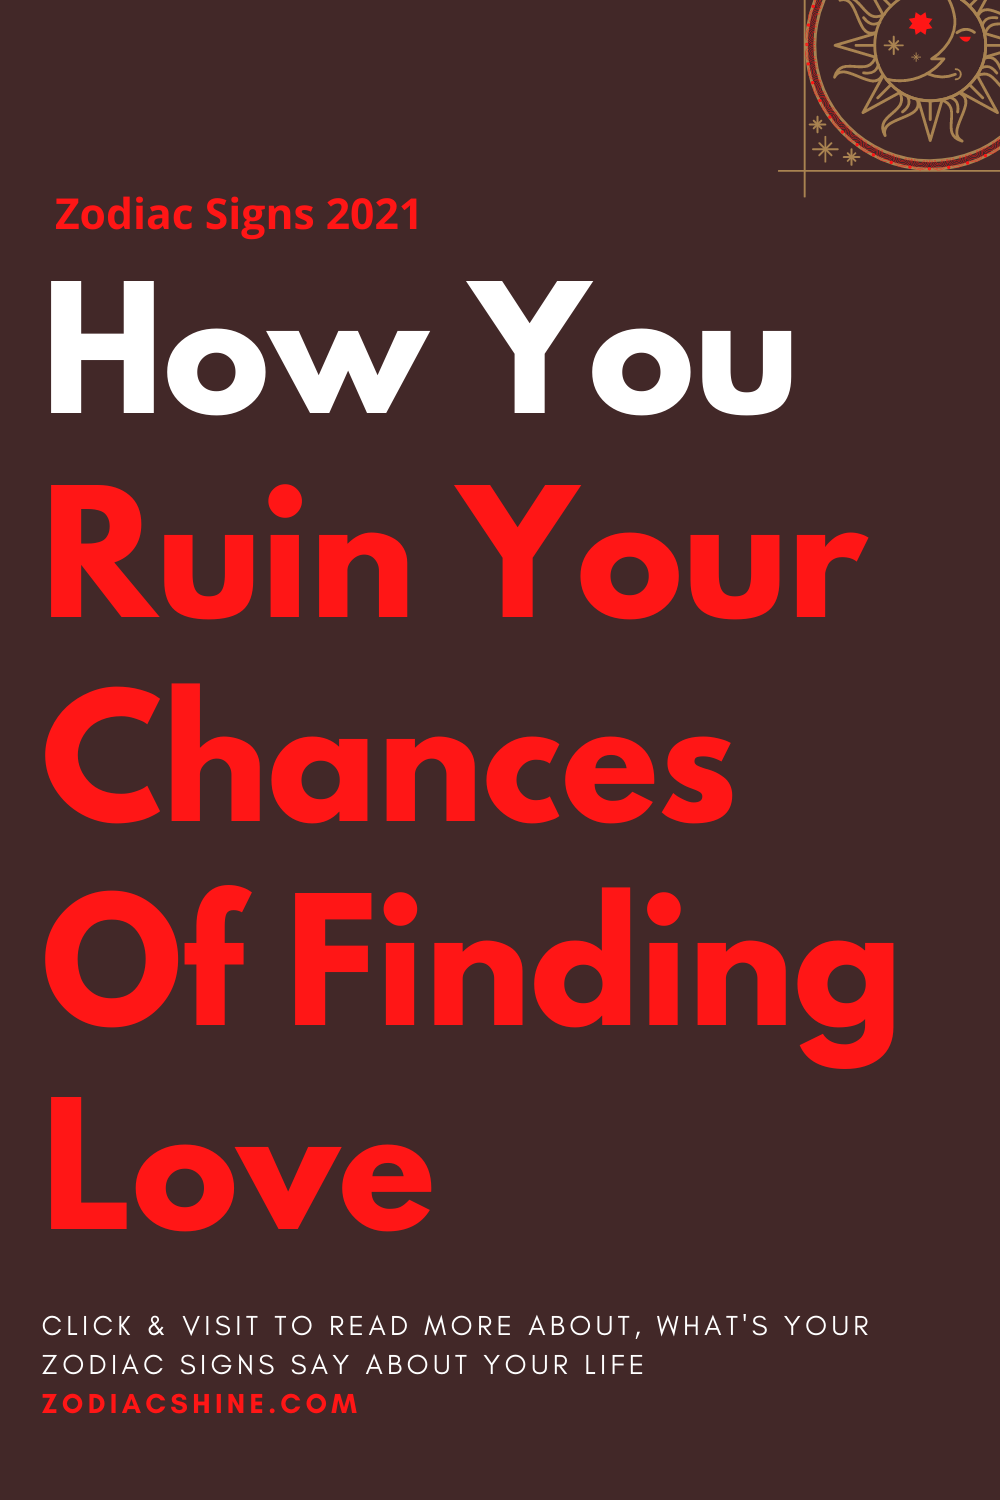 How You Ruin Your Chances Of Finding Love